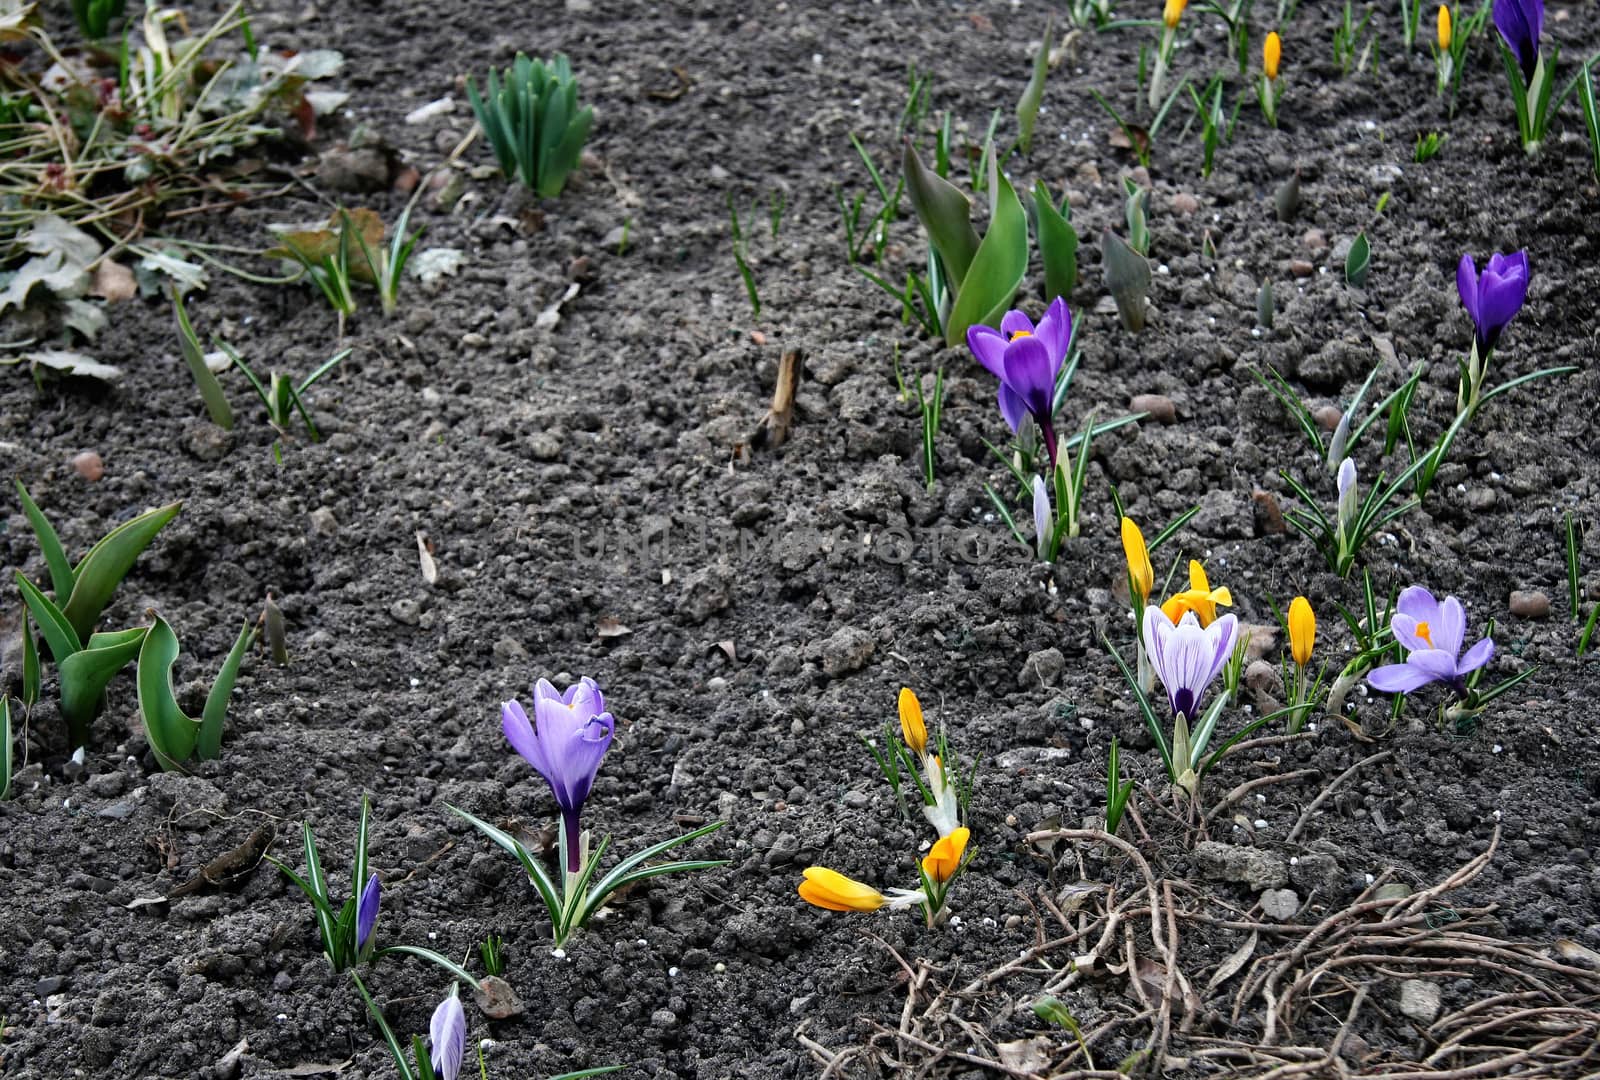 The first days of spring, the awakening of nature after winter. The earliest spring flowers are crocuses by bonilook